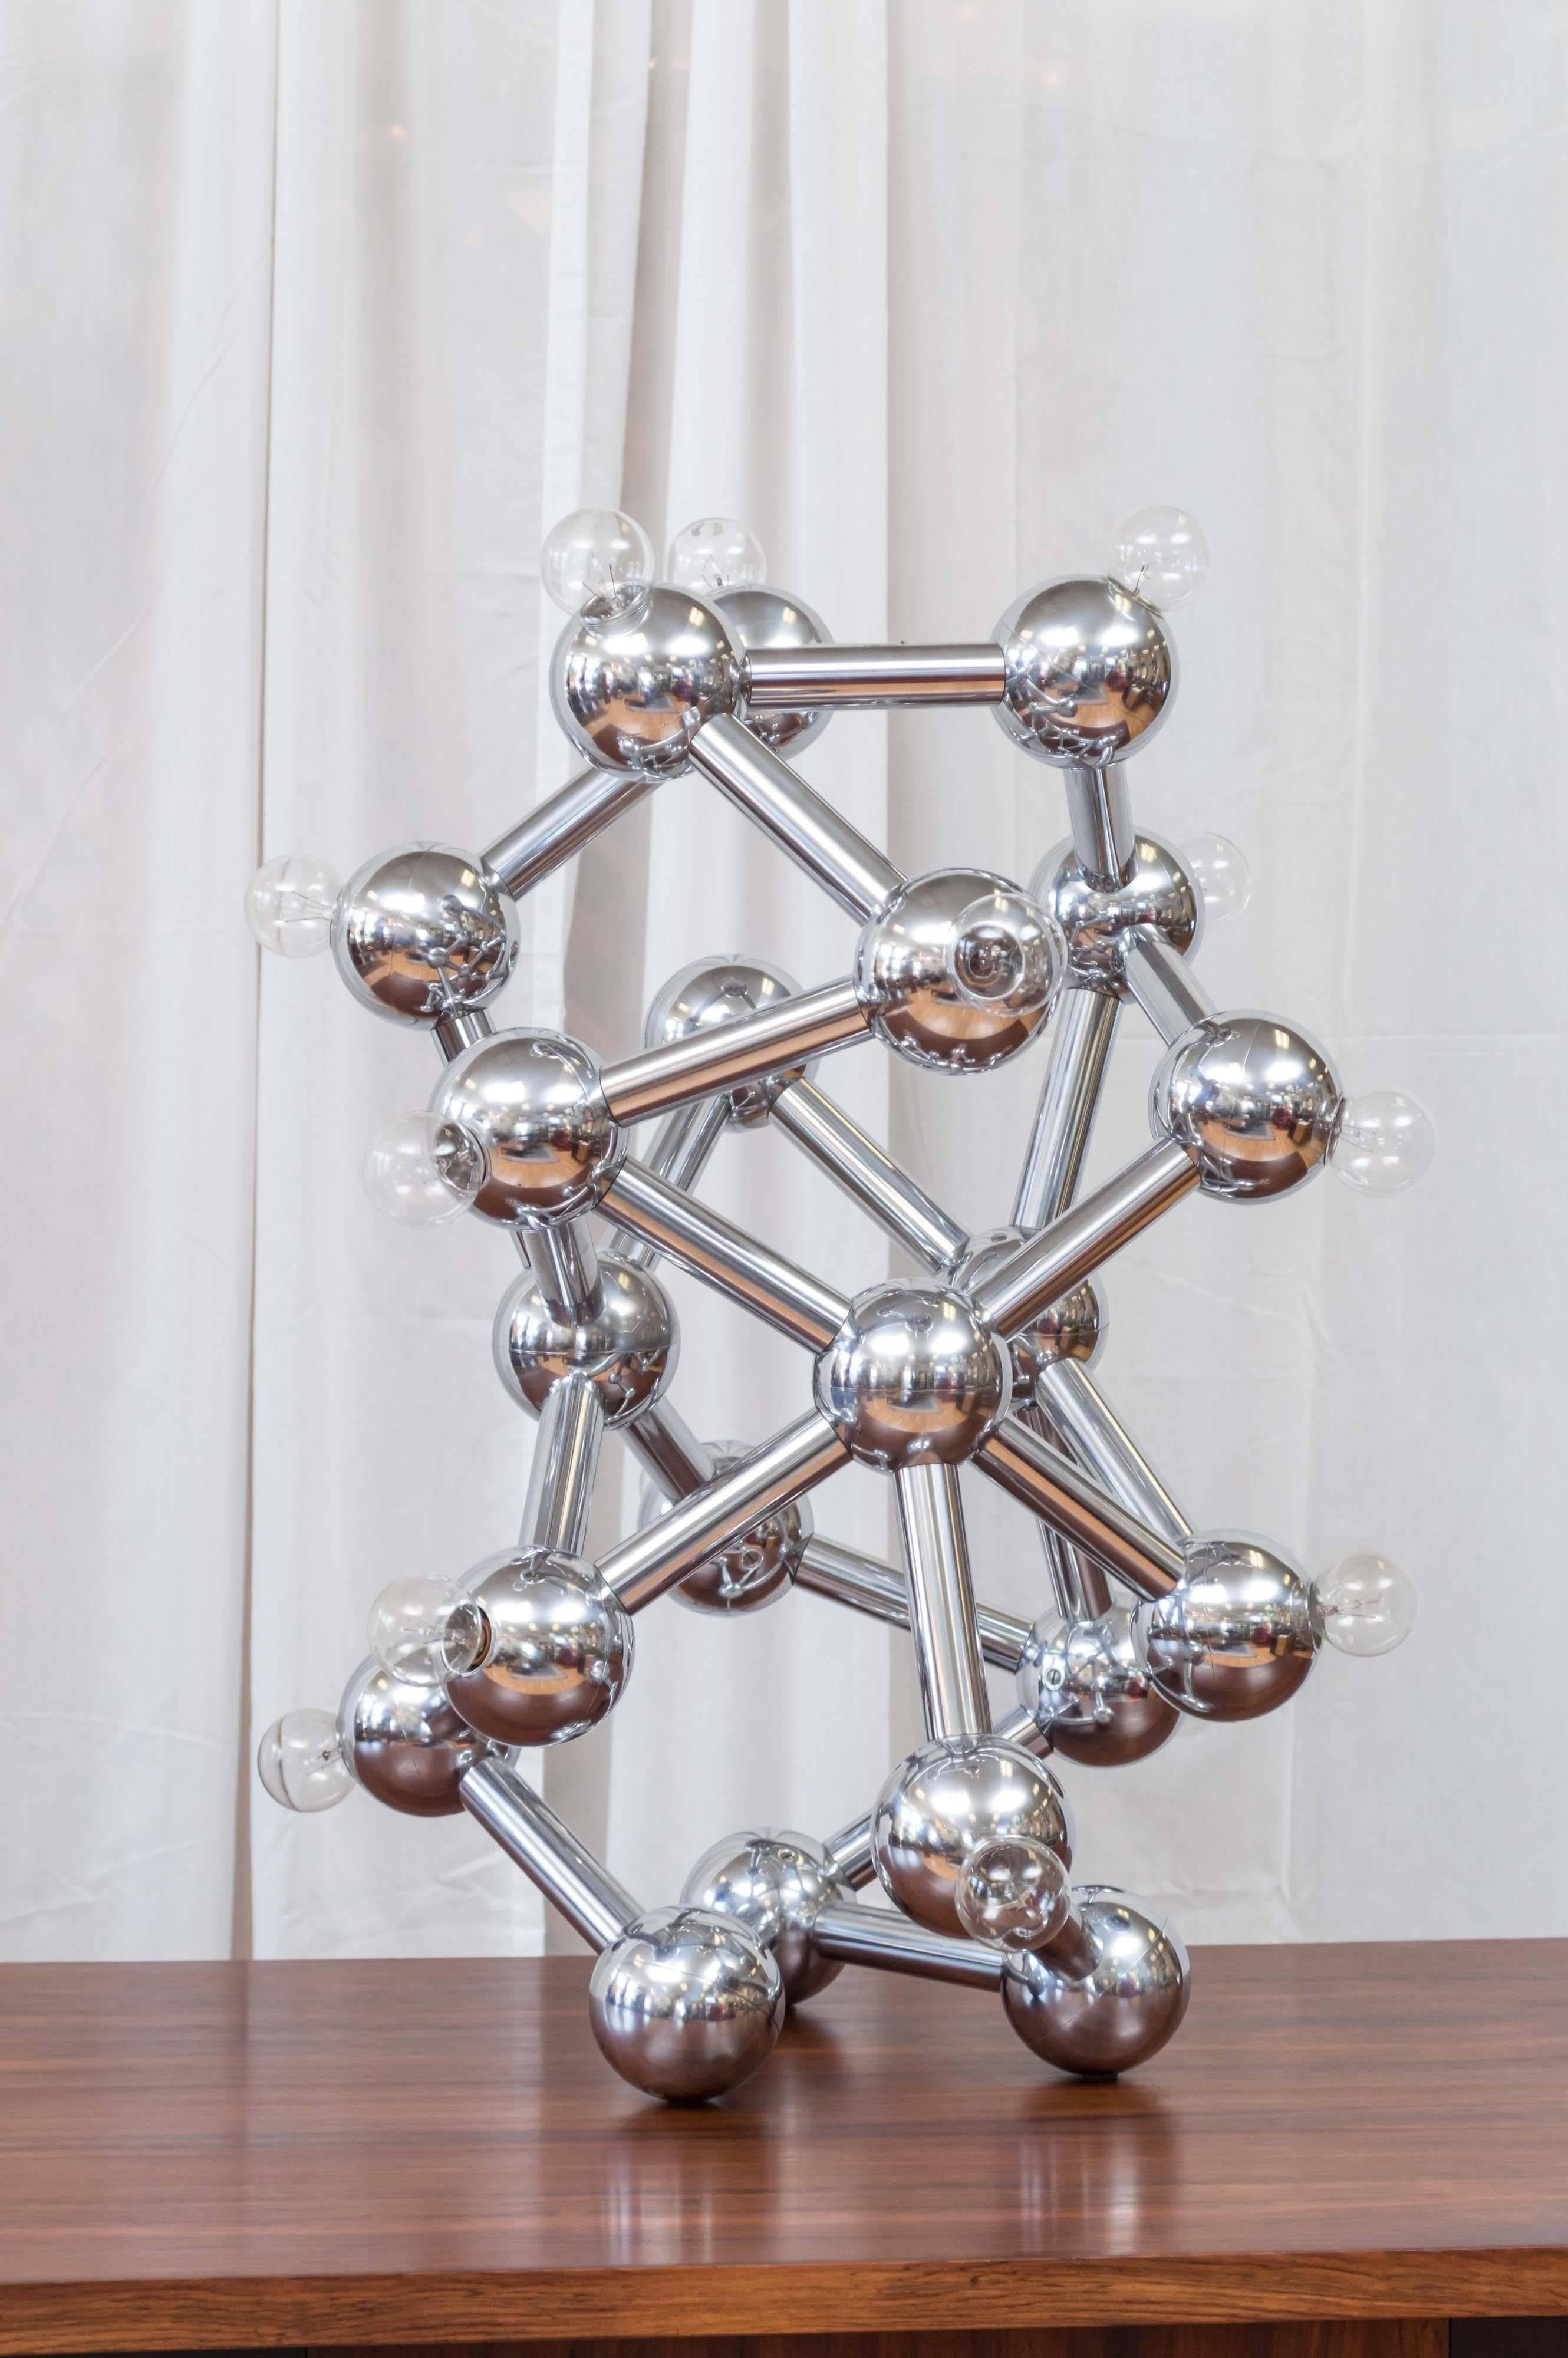 An awesome and oversized eighteen-light chrome “molecule” table or floor lamp by Torino.

The design—with its chrome tubes, joints, and spheres—is very reminiscent of the iconic Atomium constructed for the 1958 World’s Fair in Brussels. Large enough